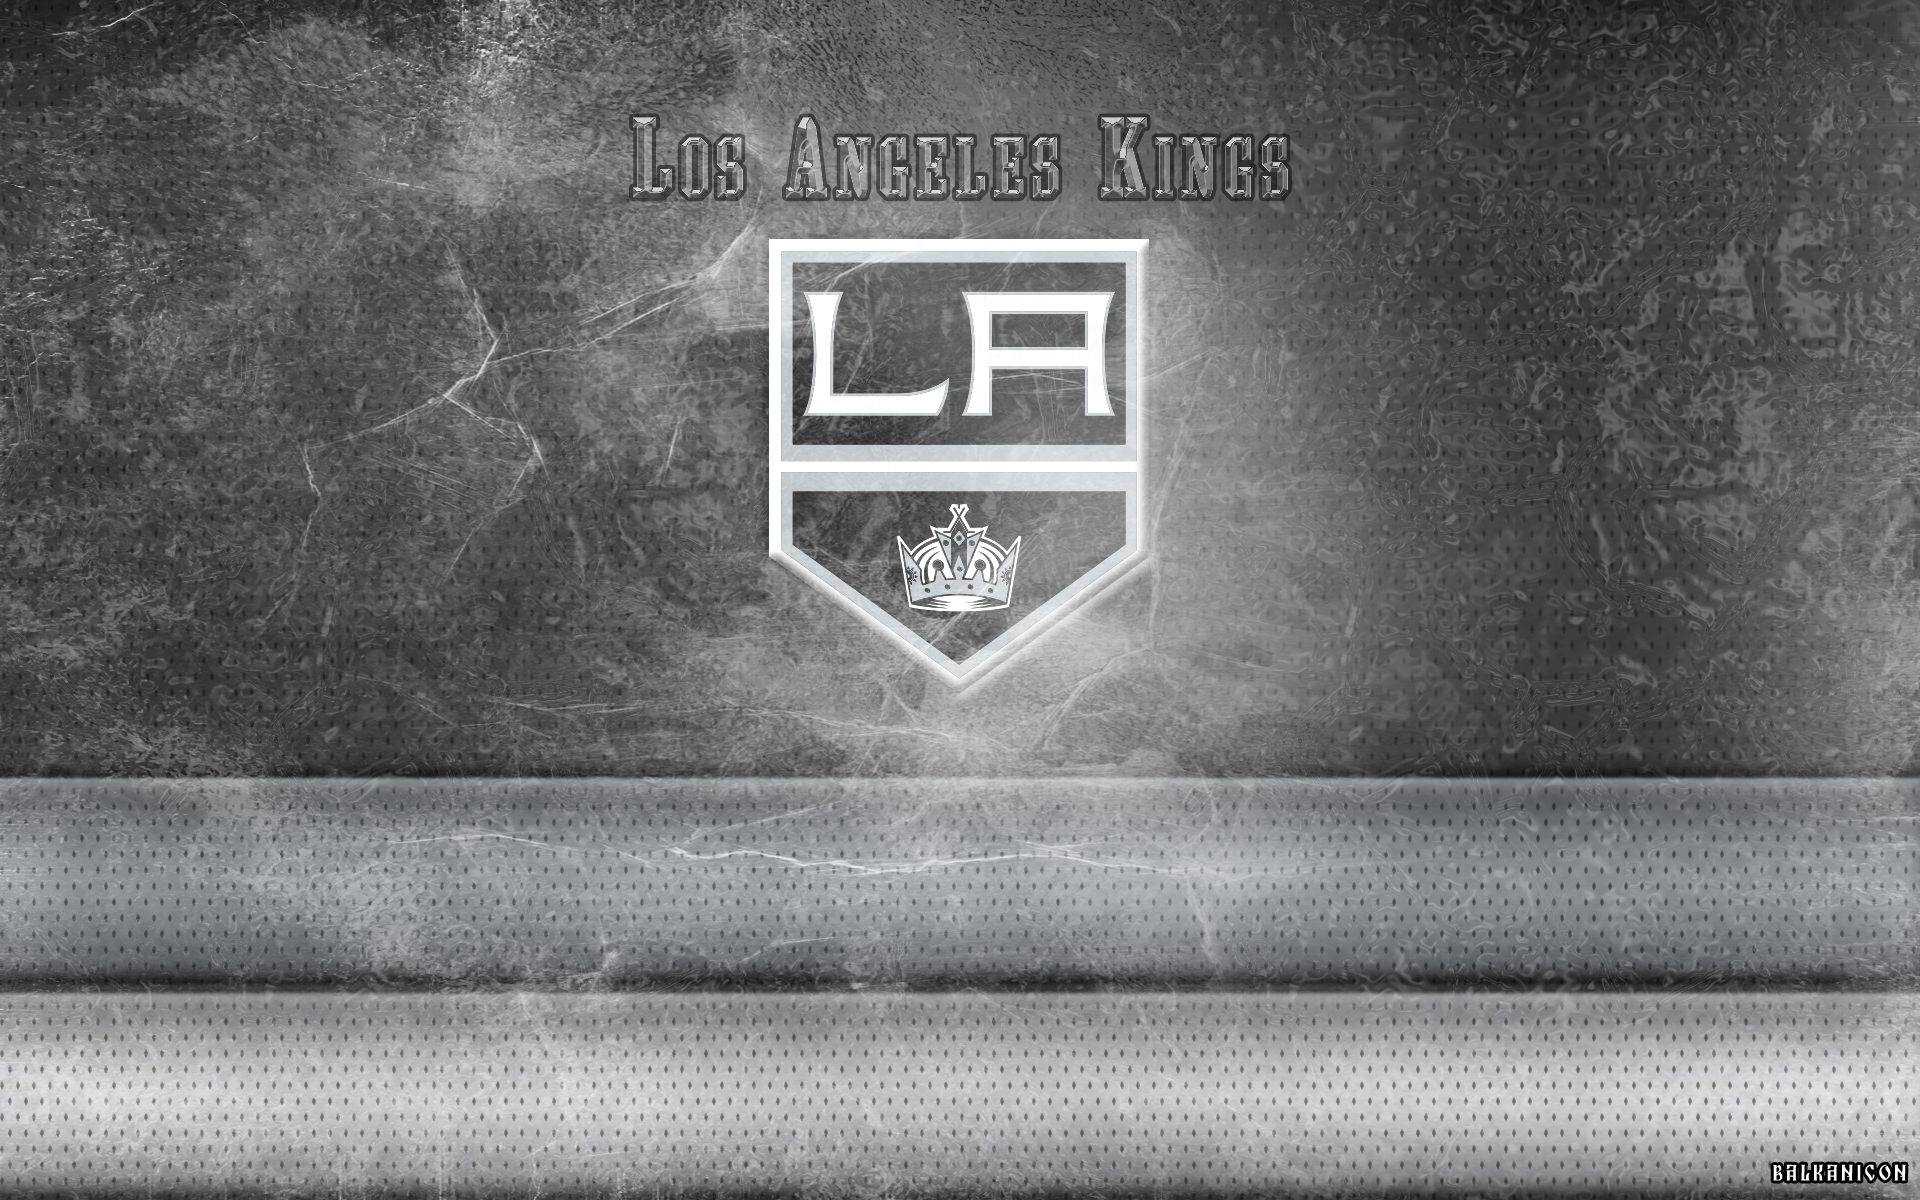 Los Angeles Kings wallpaper by Balkanicon on